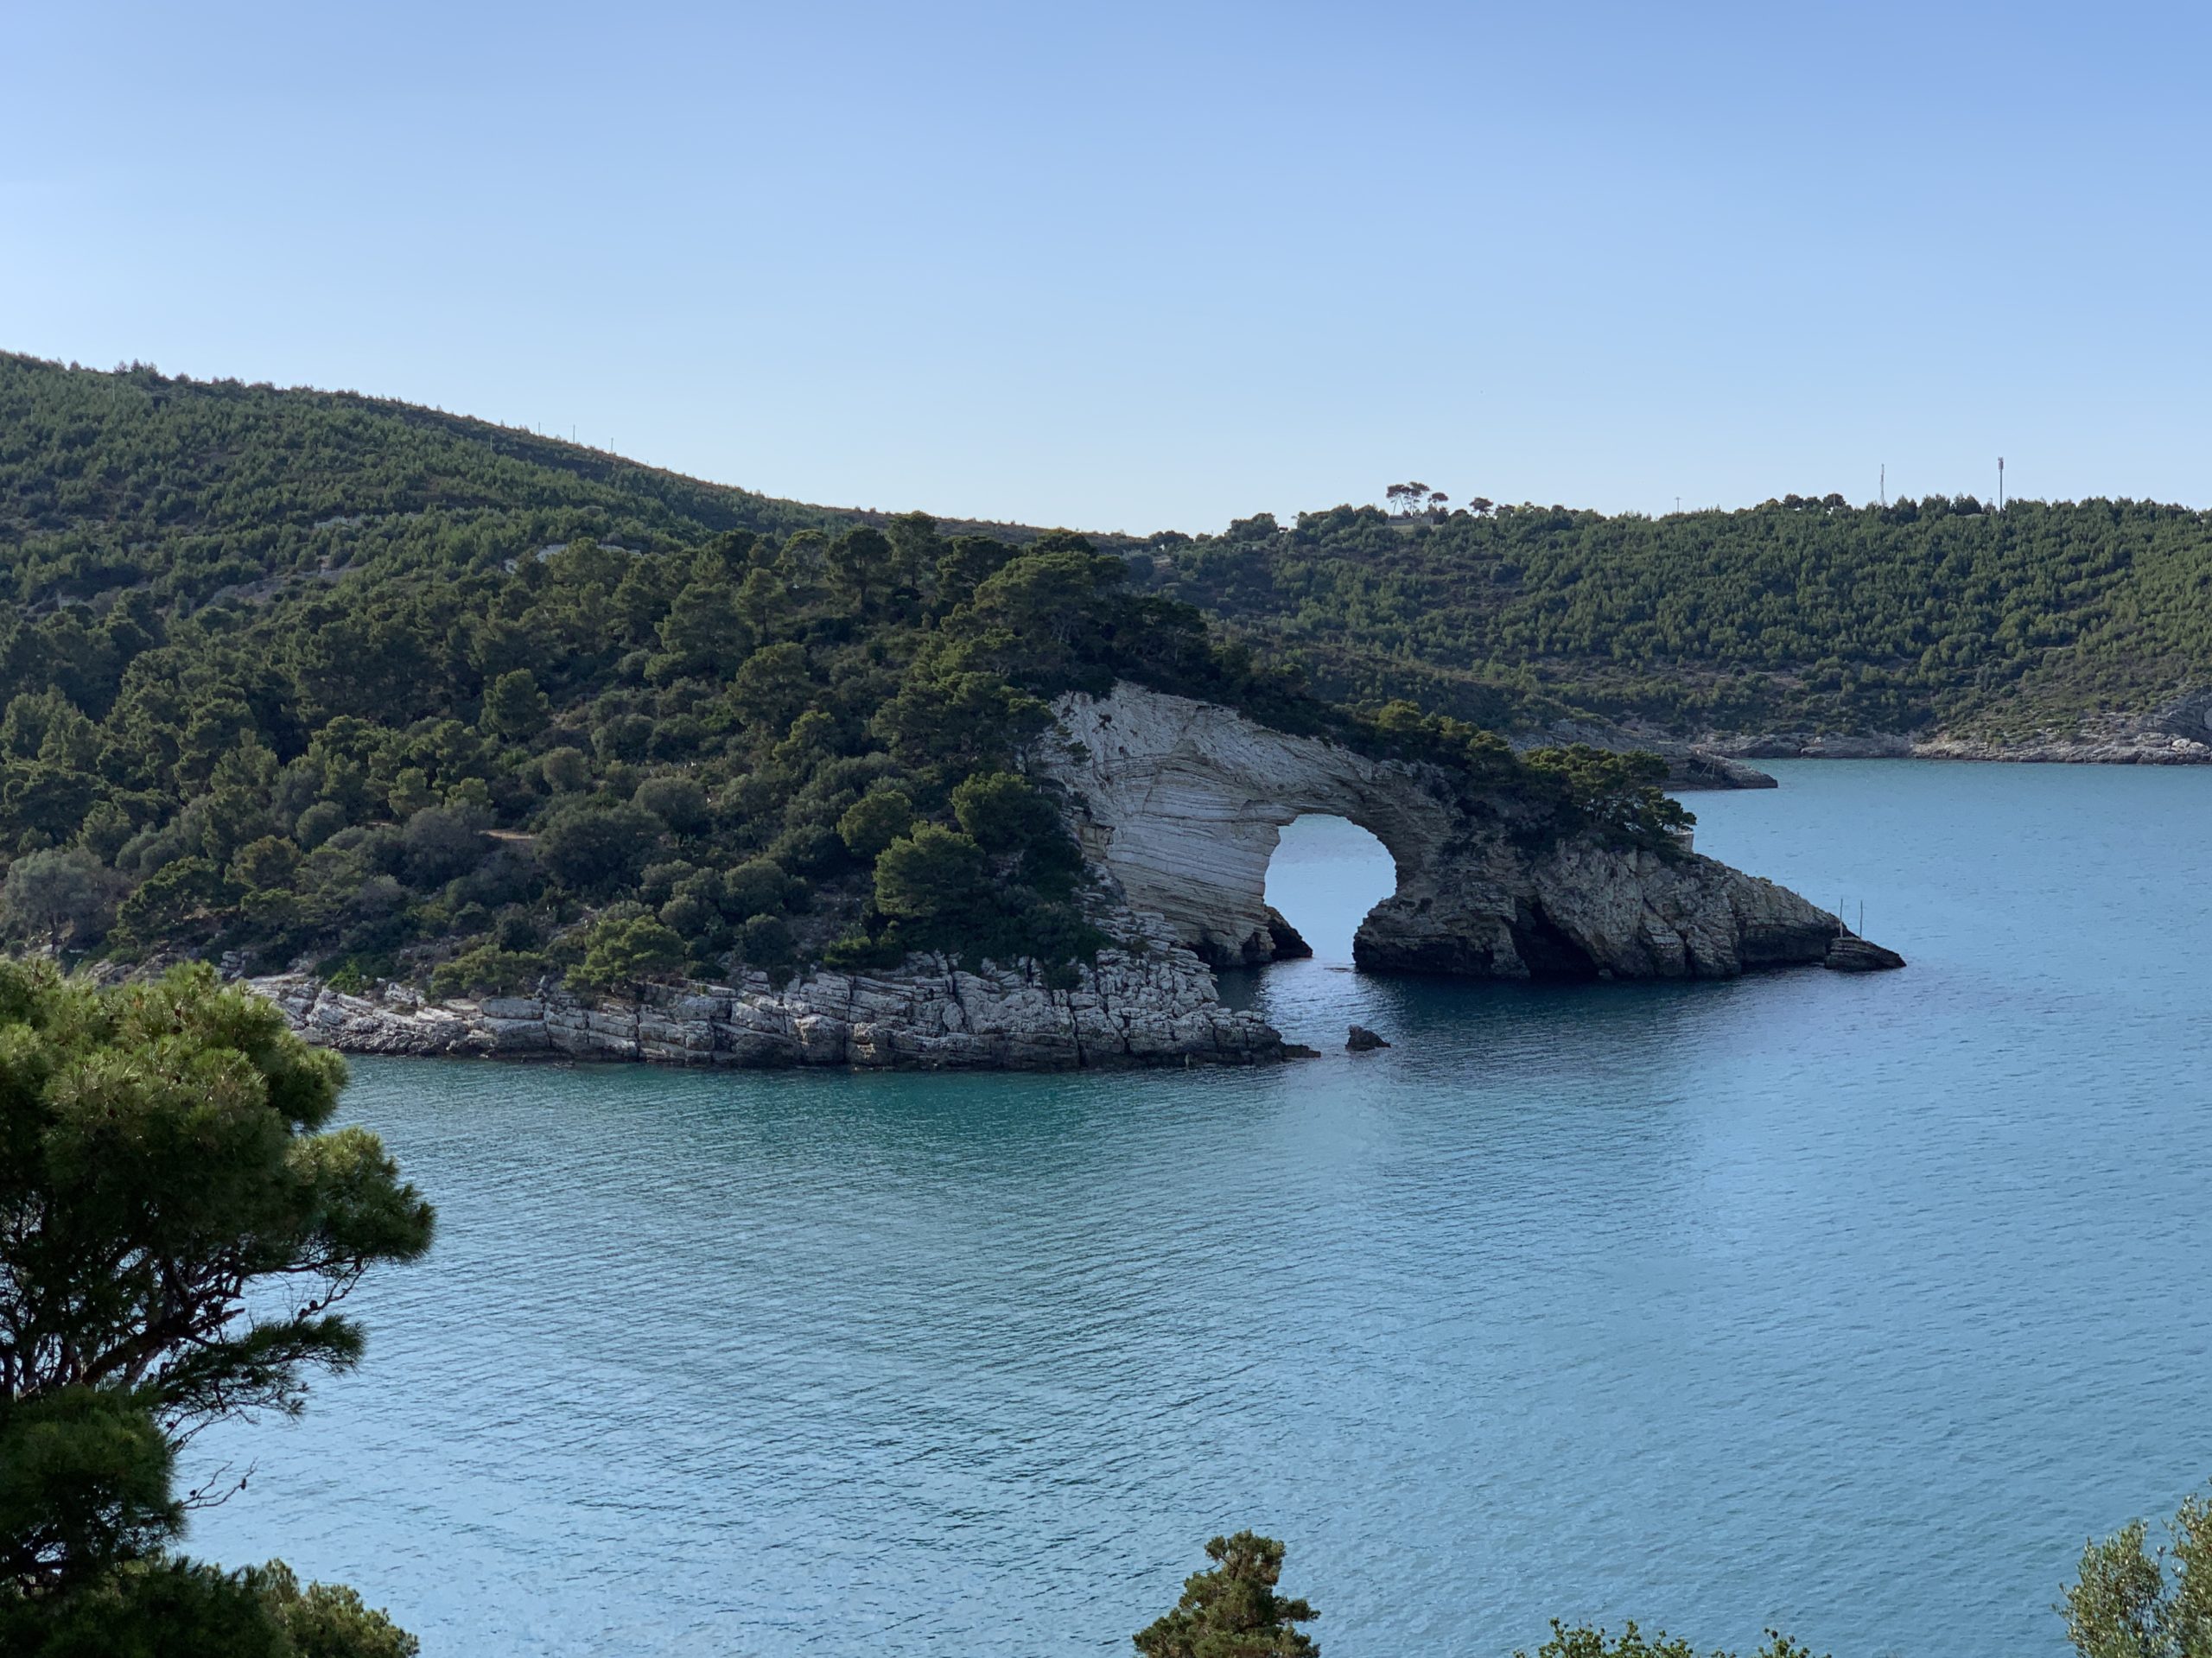 The stunning Gargano coast with sea caves, stacks and coves.